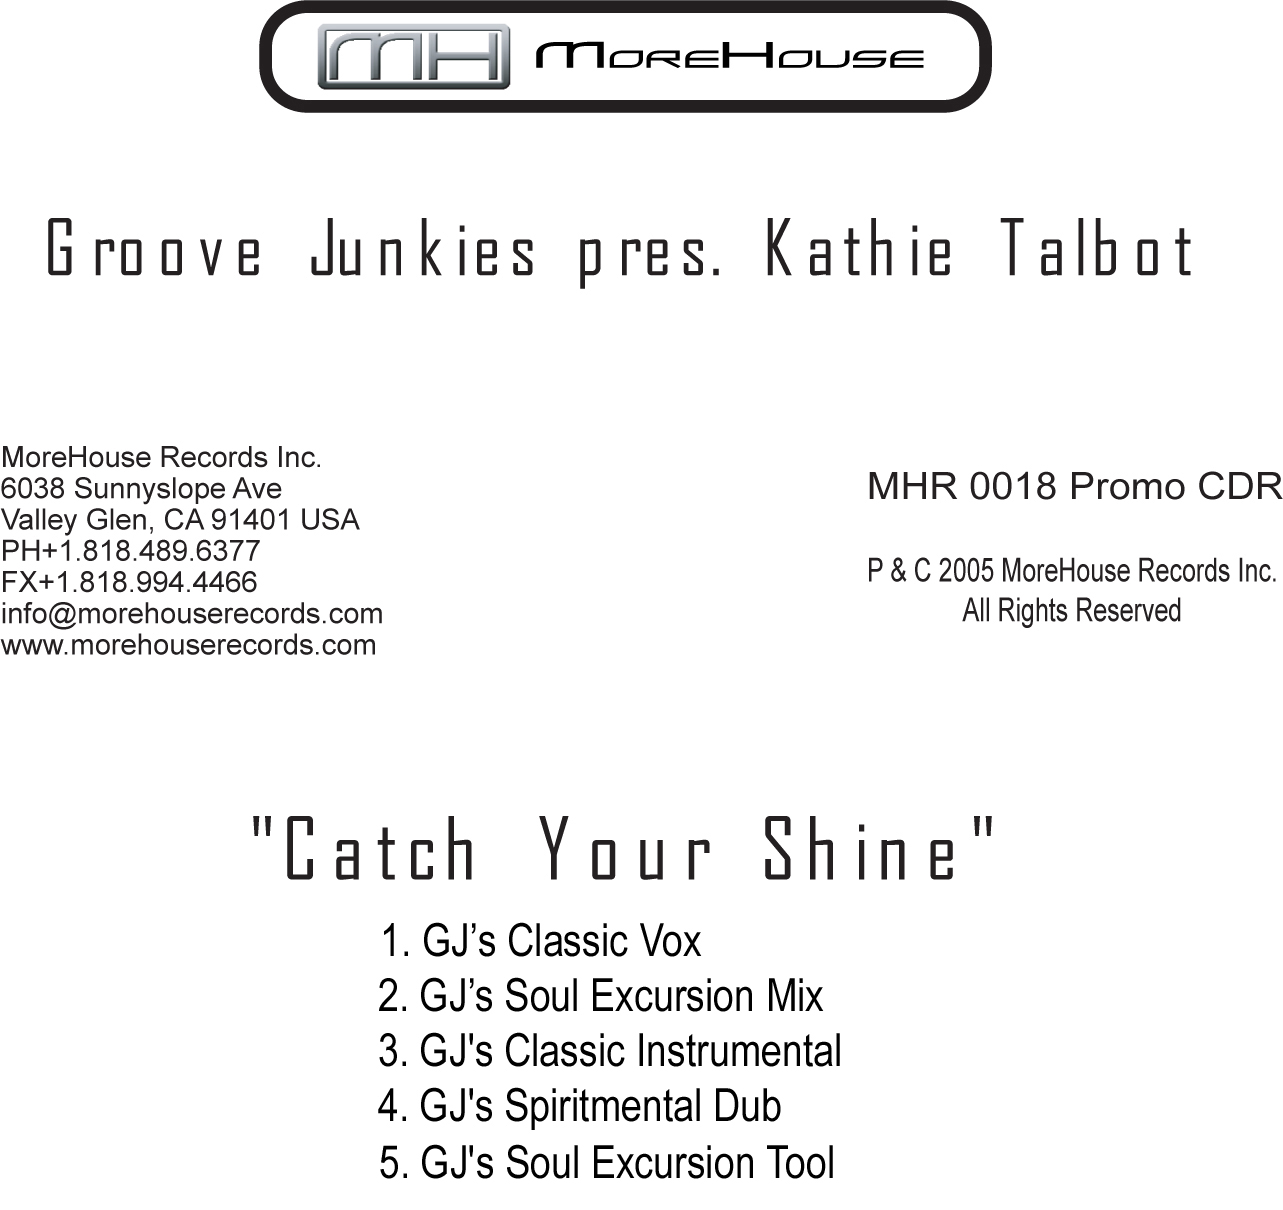 Groove Junkies Pres. Kathie Talbot - Catch Your Shine